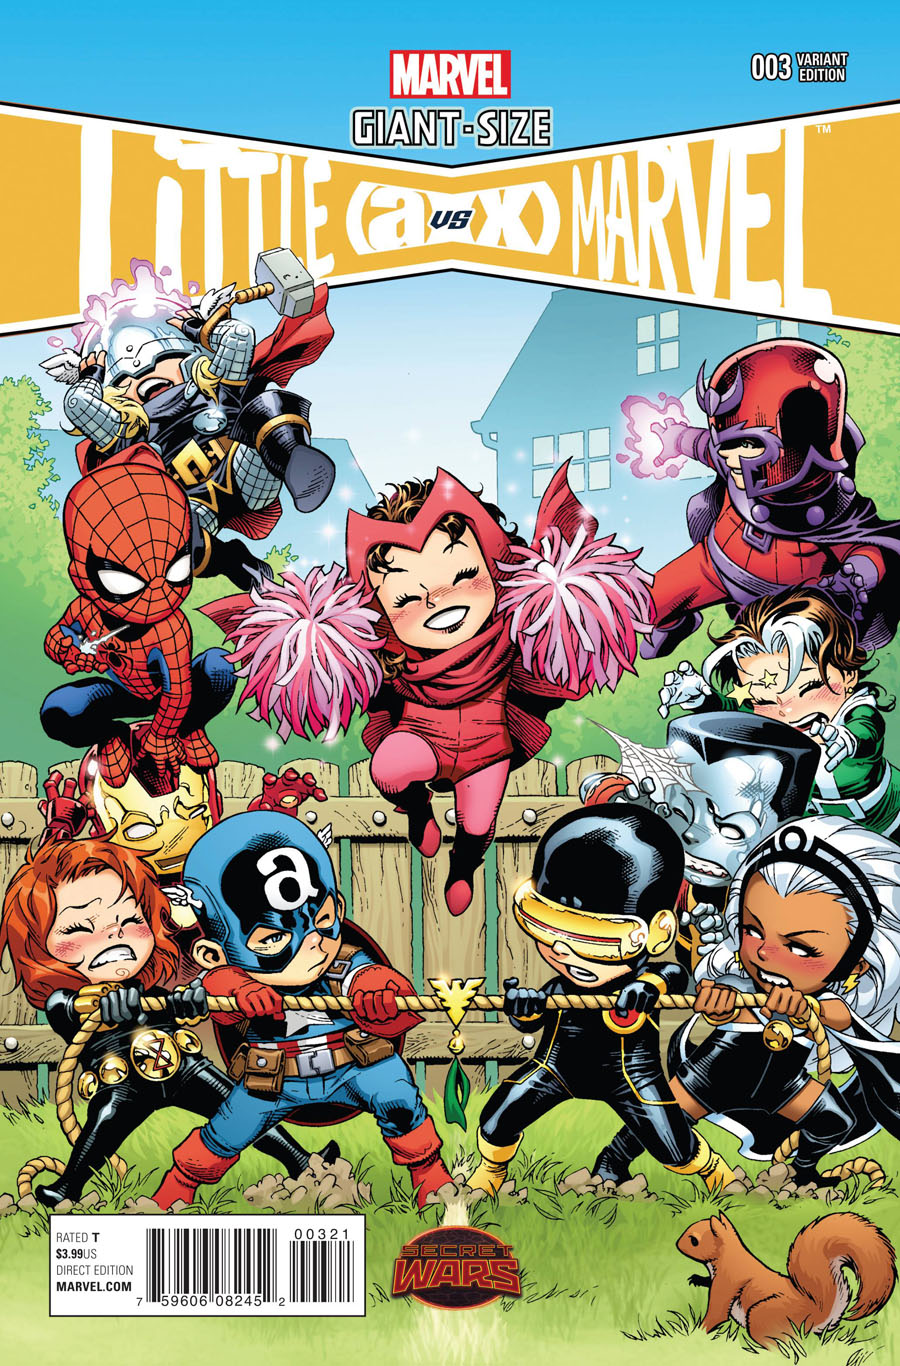 Giant-Size Little Marvel AvX #3 Cover B Incentive Jim Cheung Variant Cover (Secret Wars Warzones Tie-In)